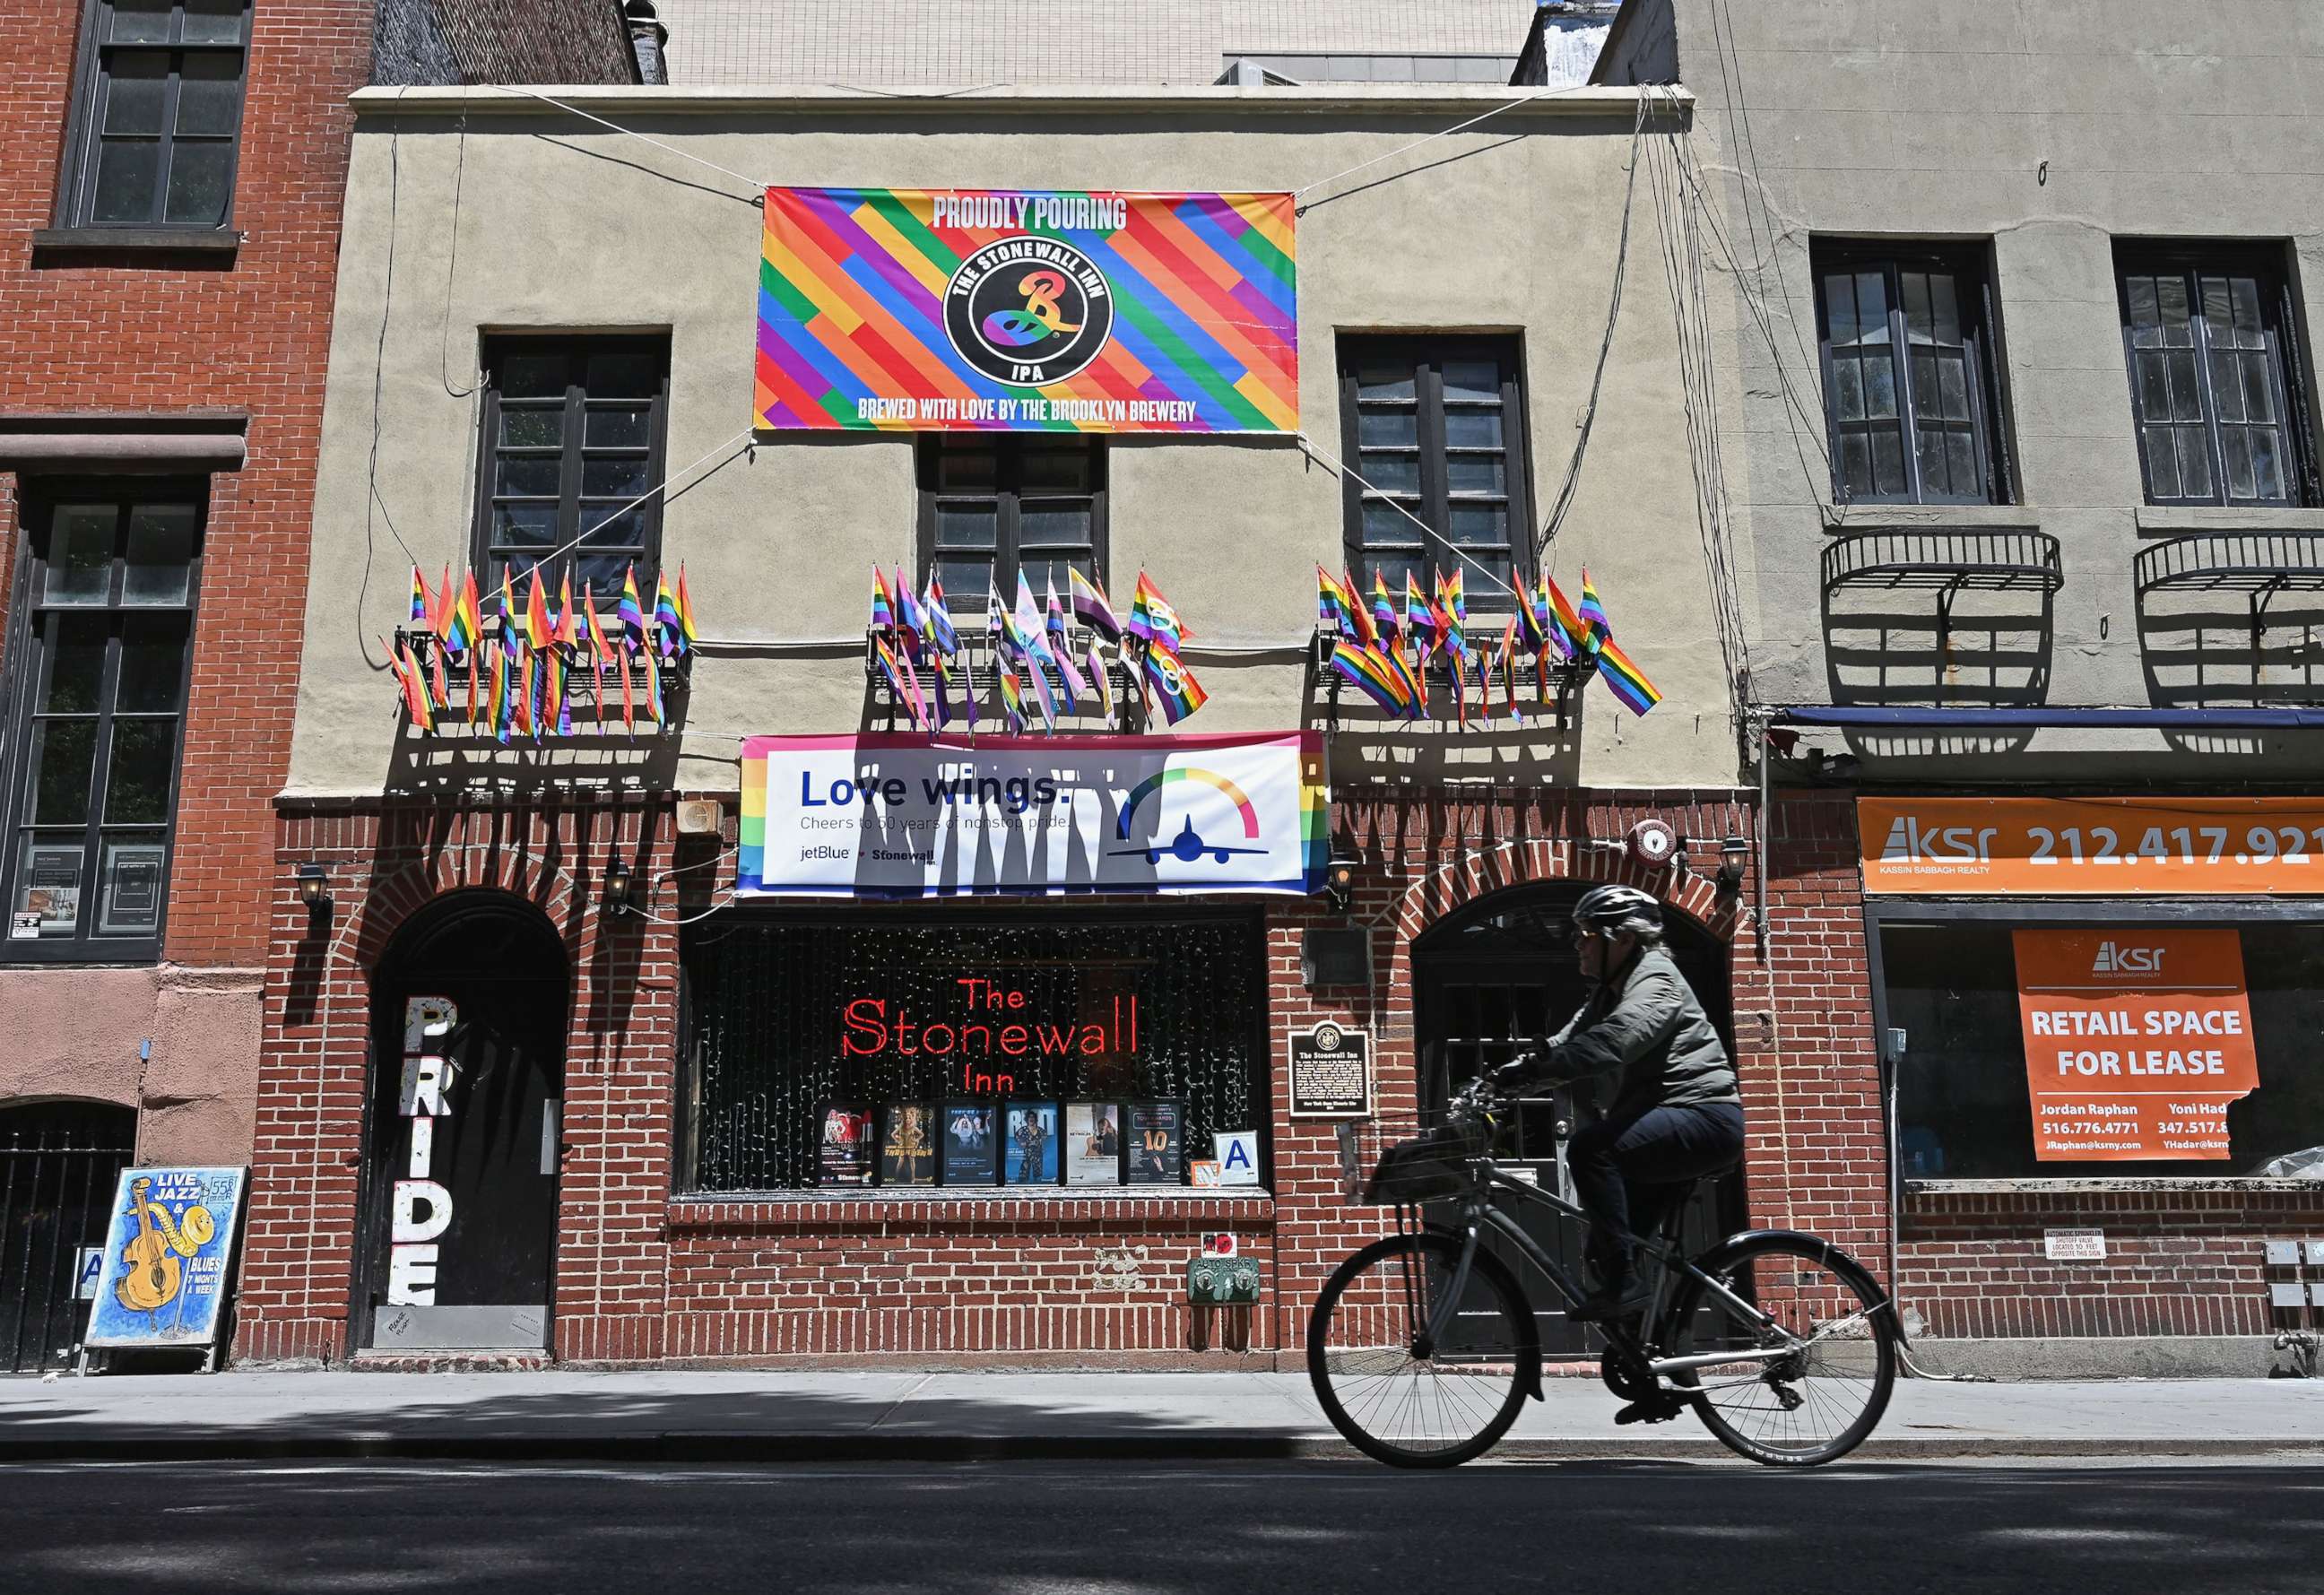 PHOTO: This photo shows The Stonewall Inn on June 4, 2019, in New York.